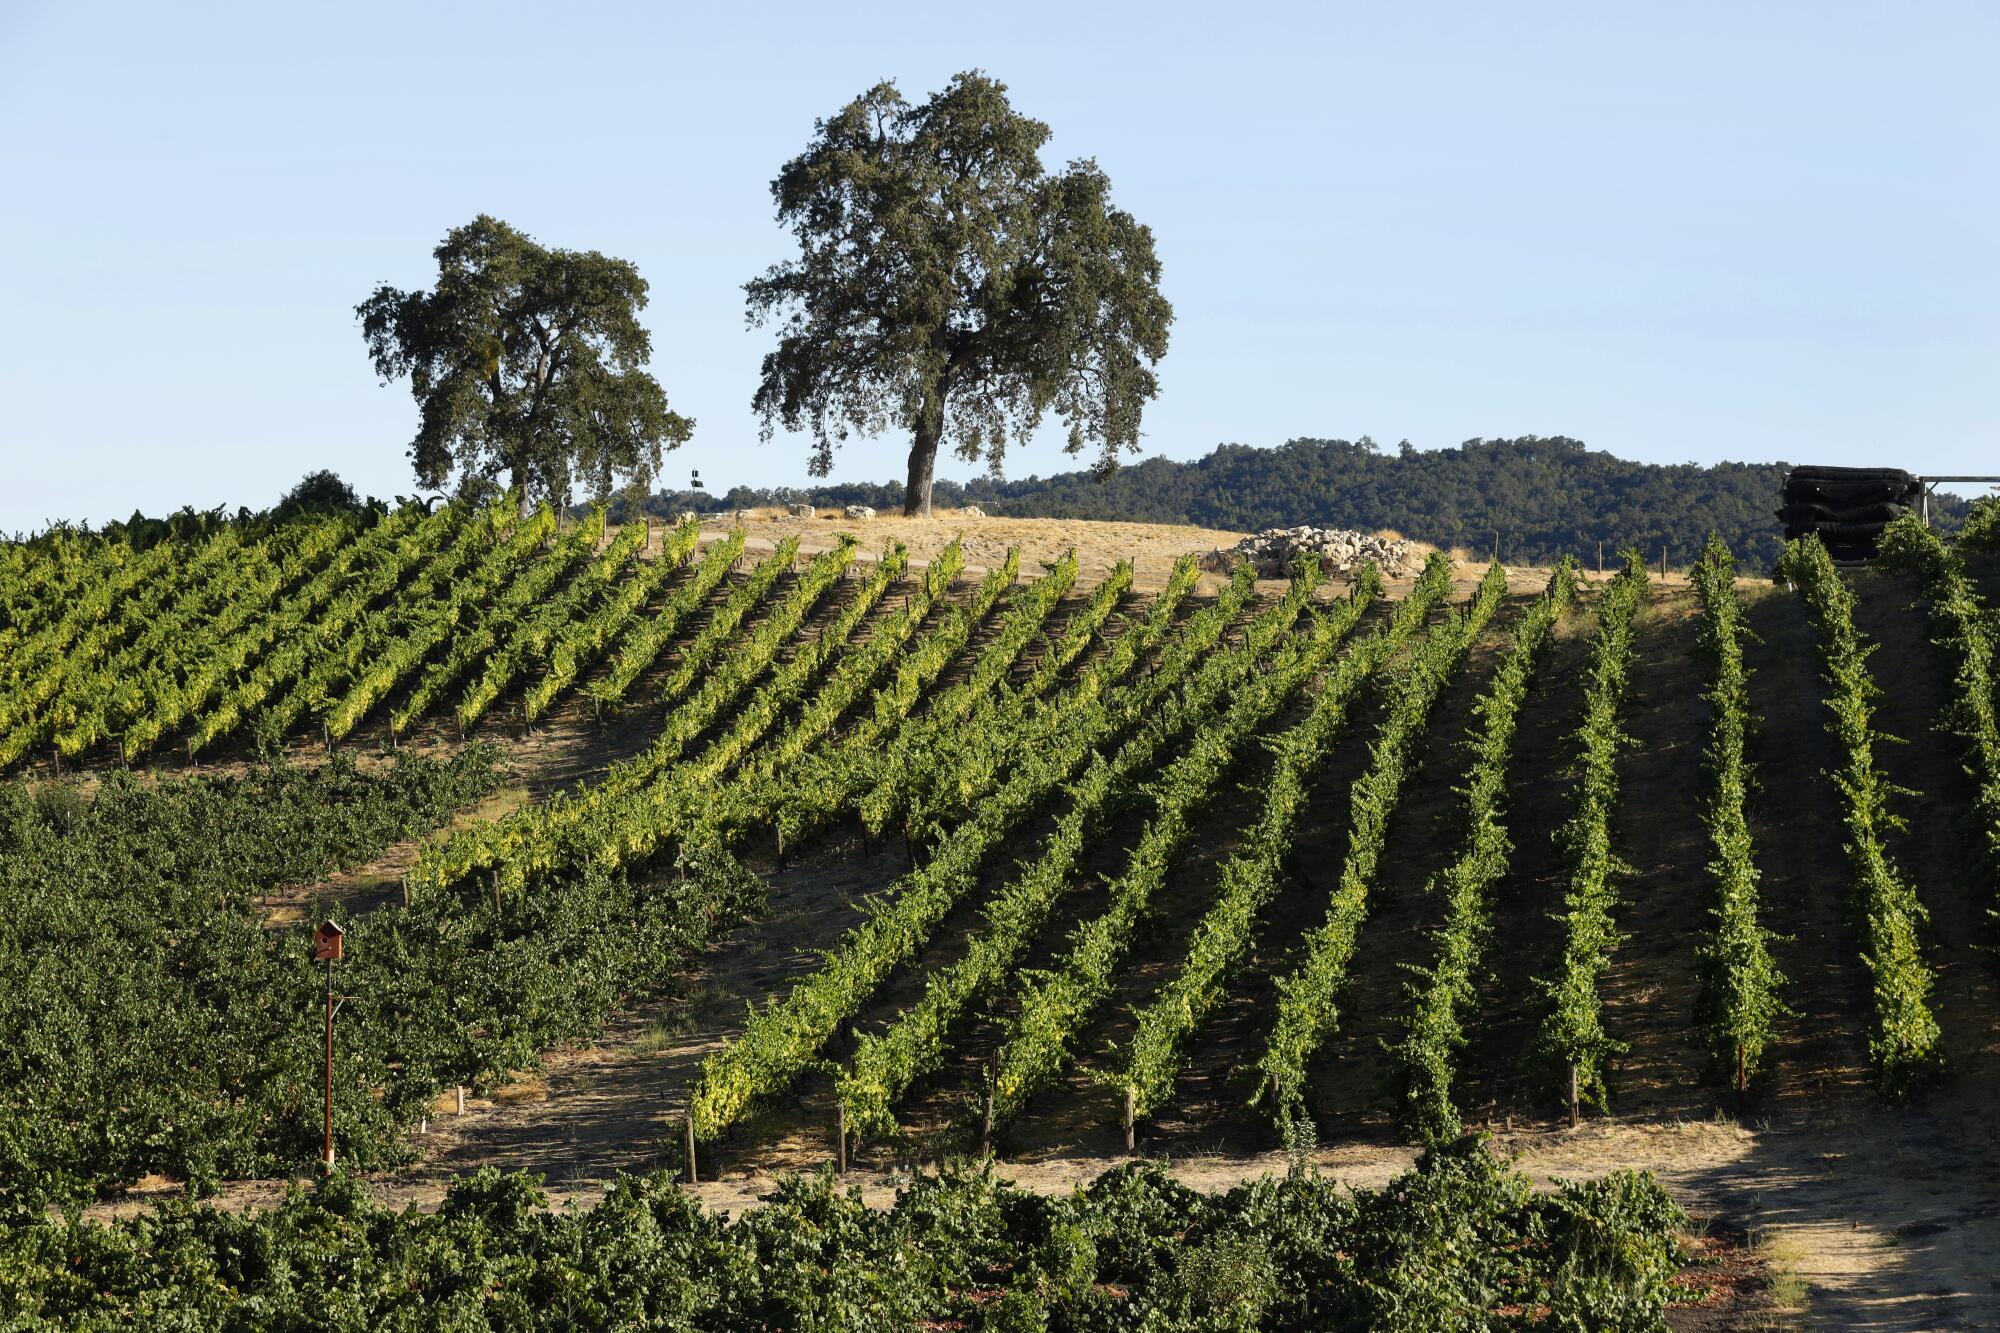 At Tablas Creek Vineyard, in the Adelaida district west of Paso Robles growing grapes.